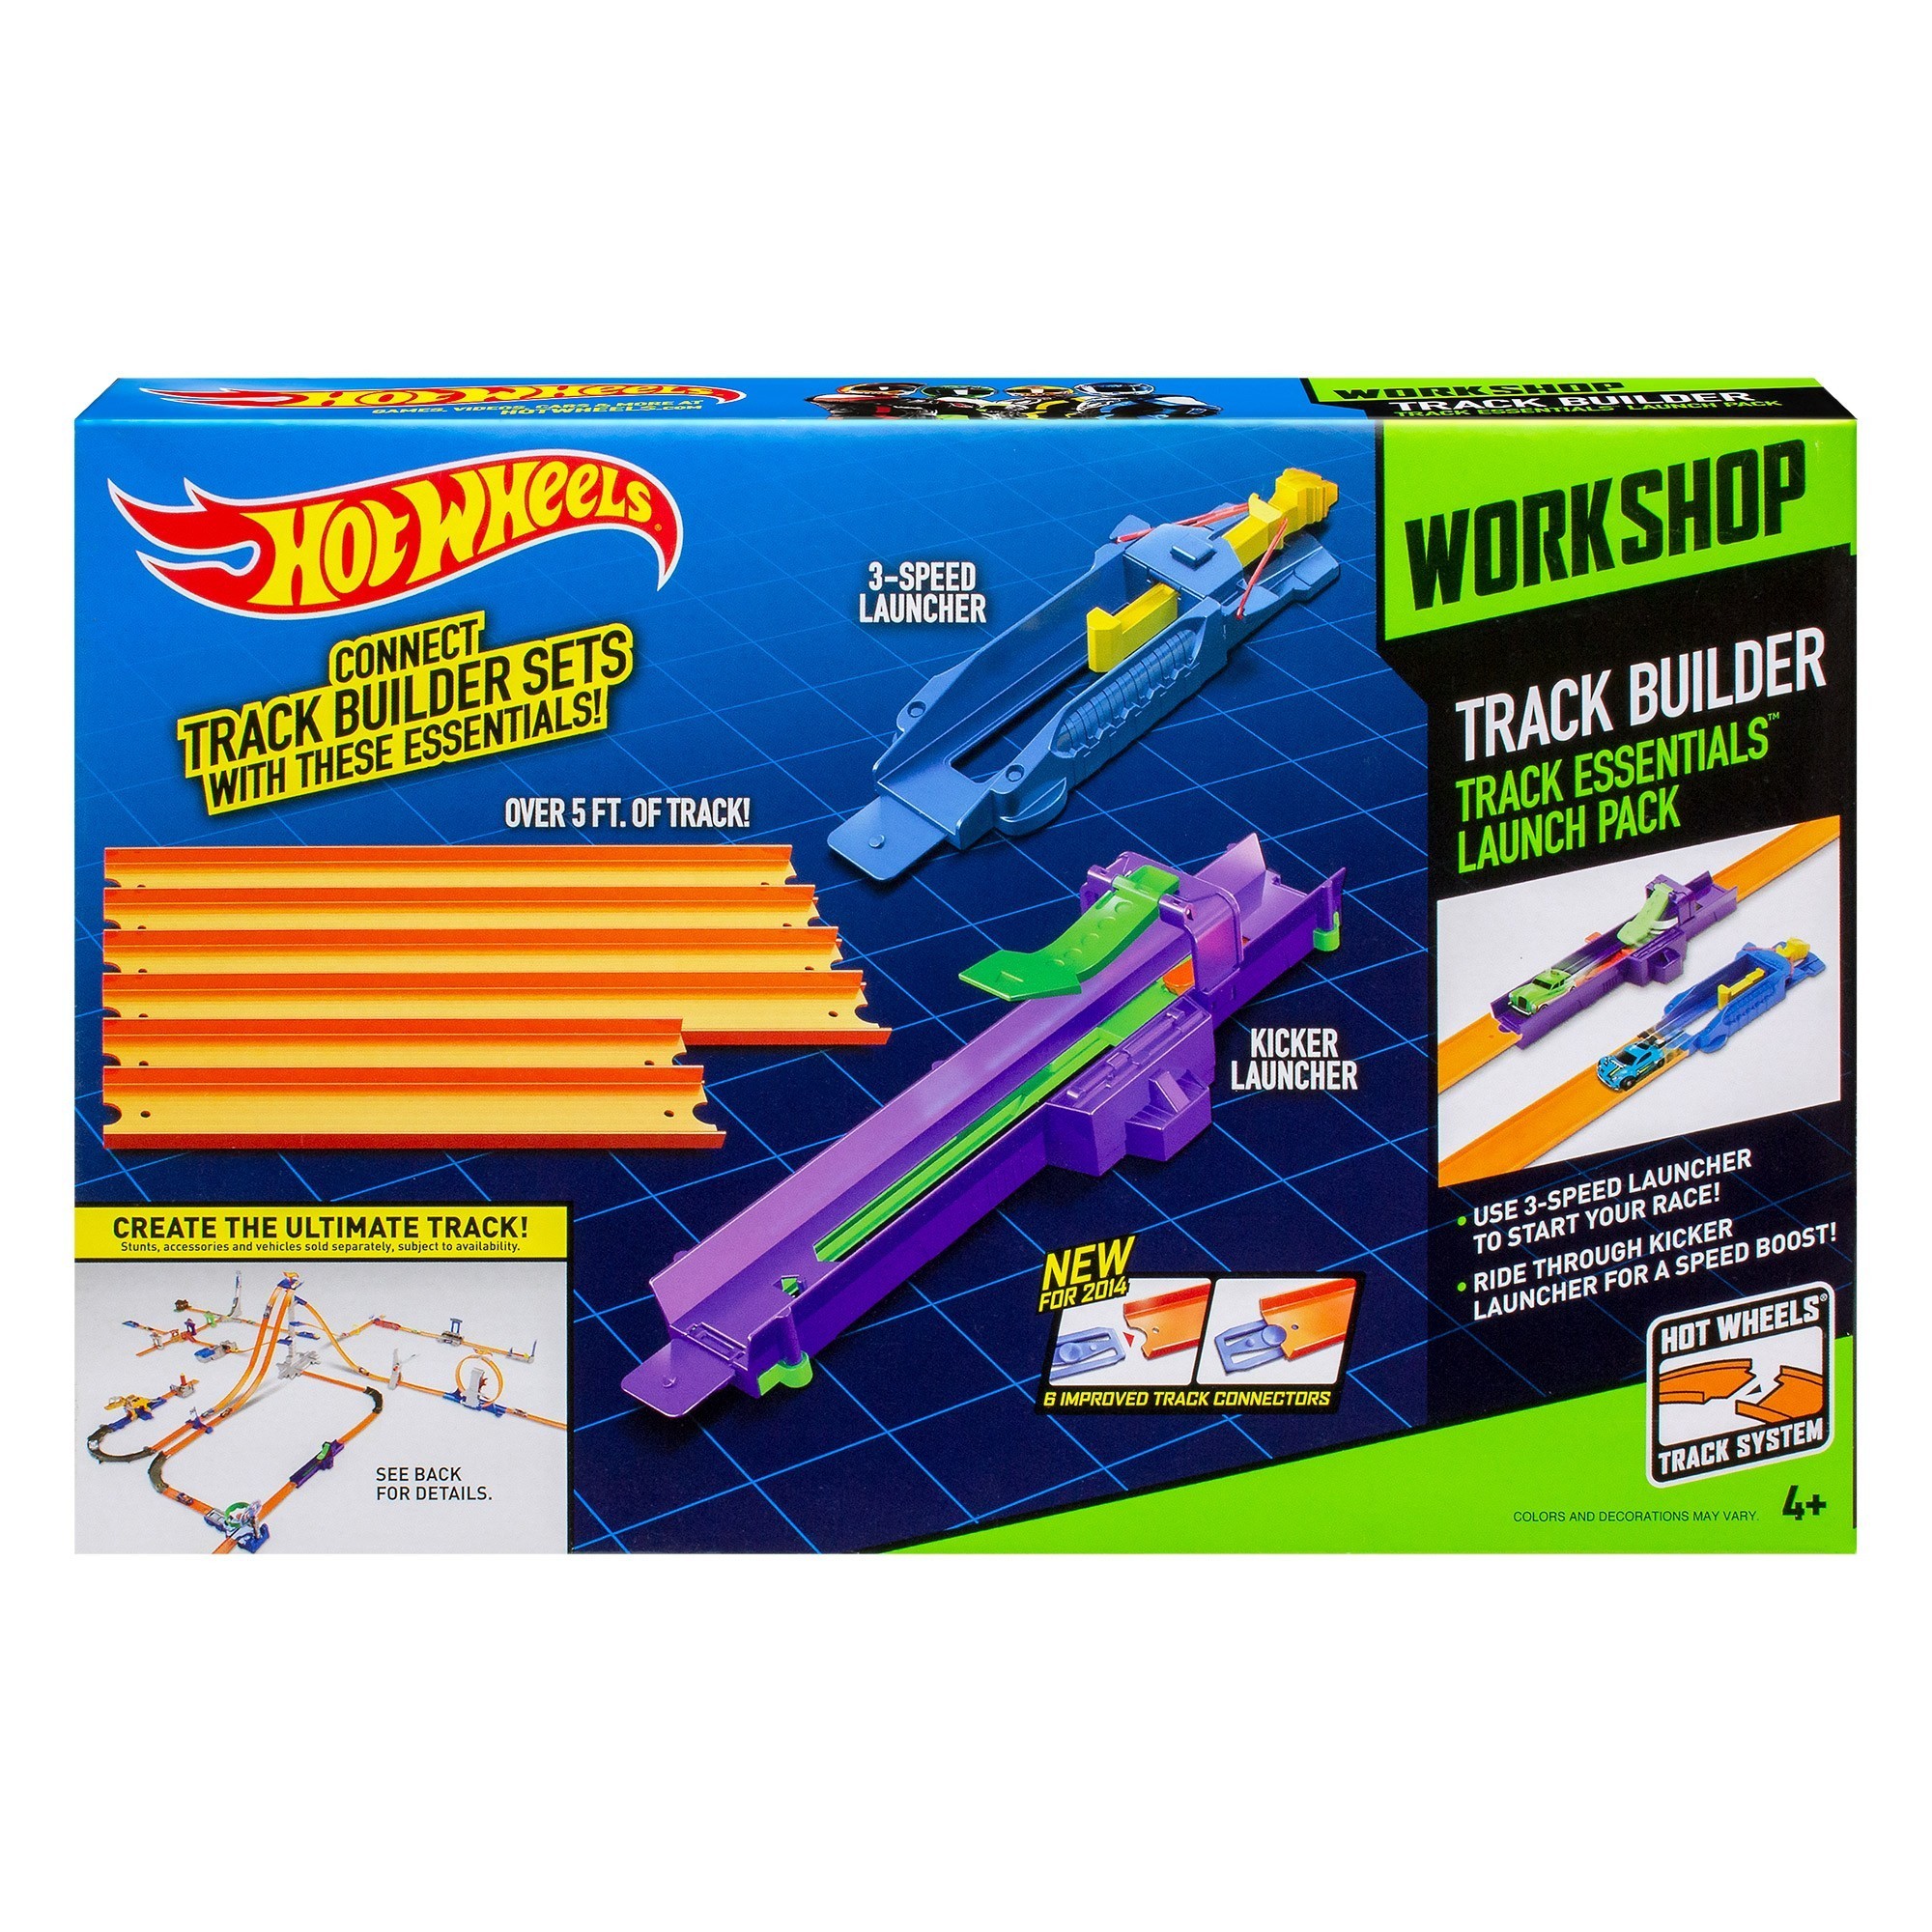 Hot Wheels - Track Builder - Track Essentials Launch Pack